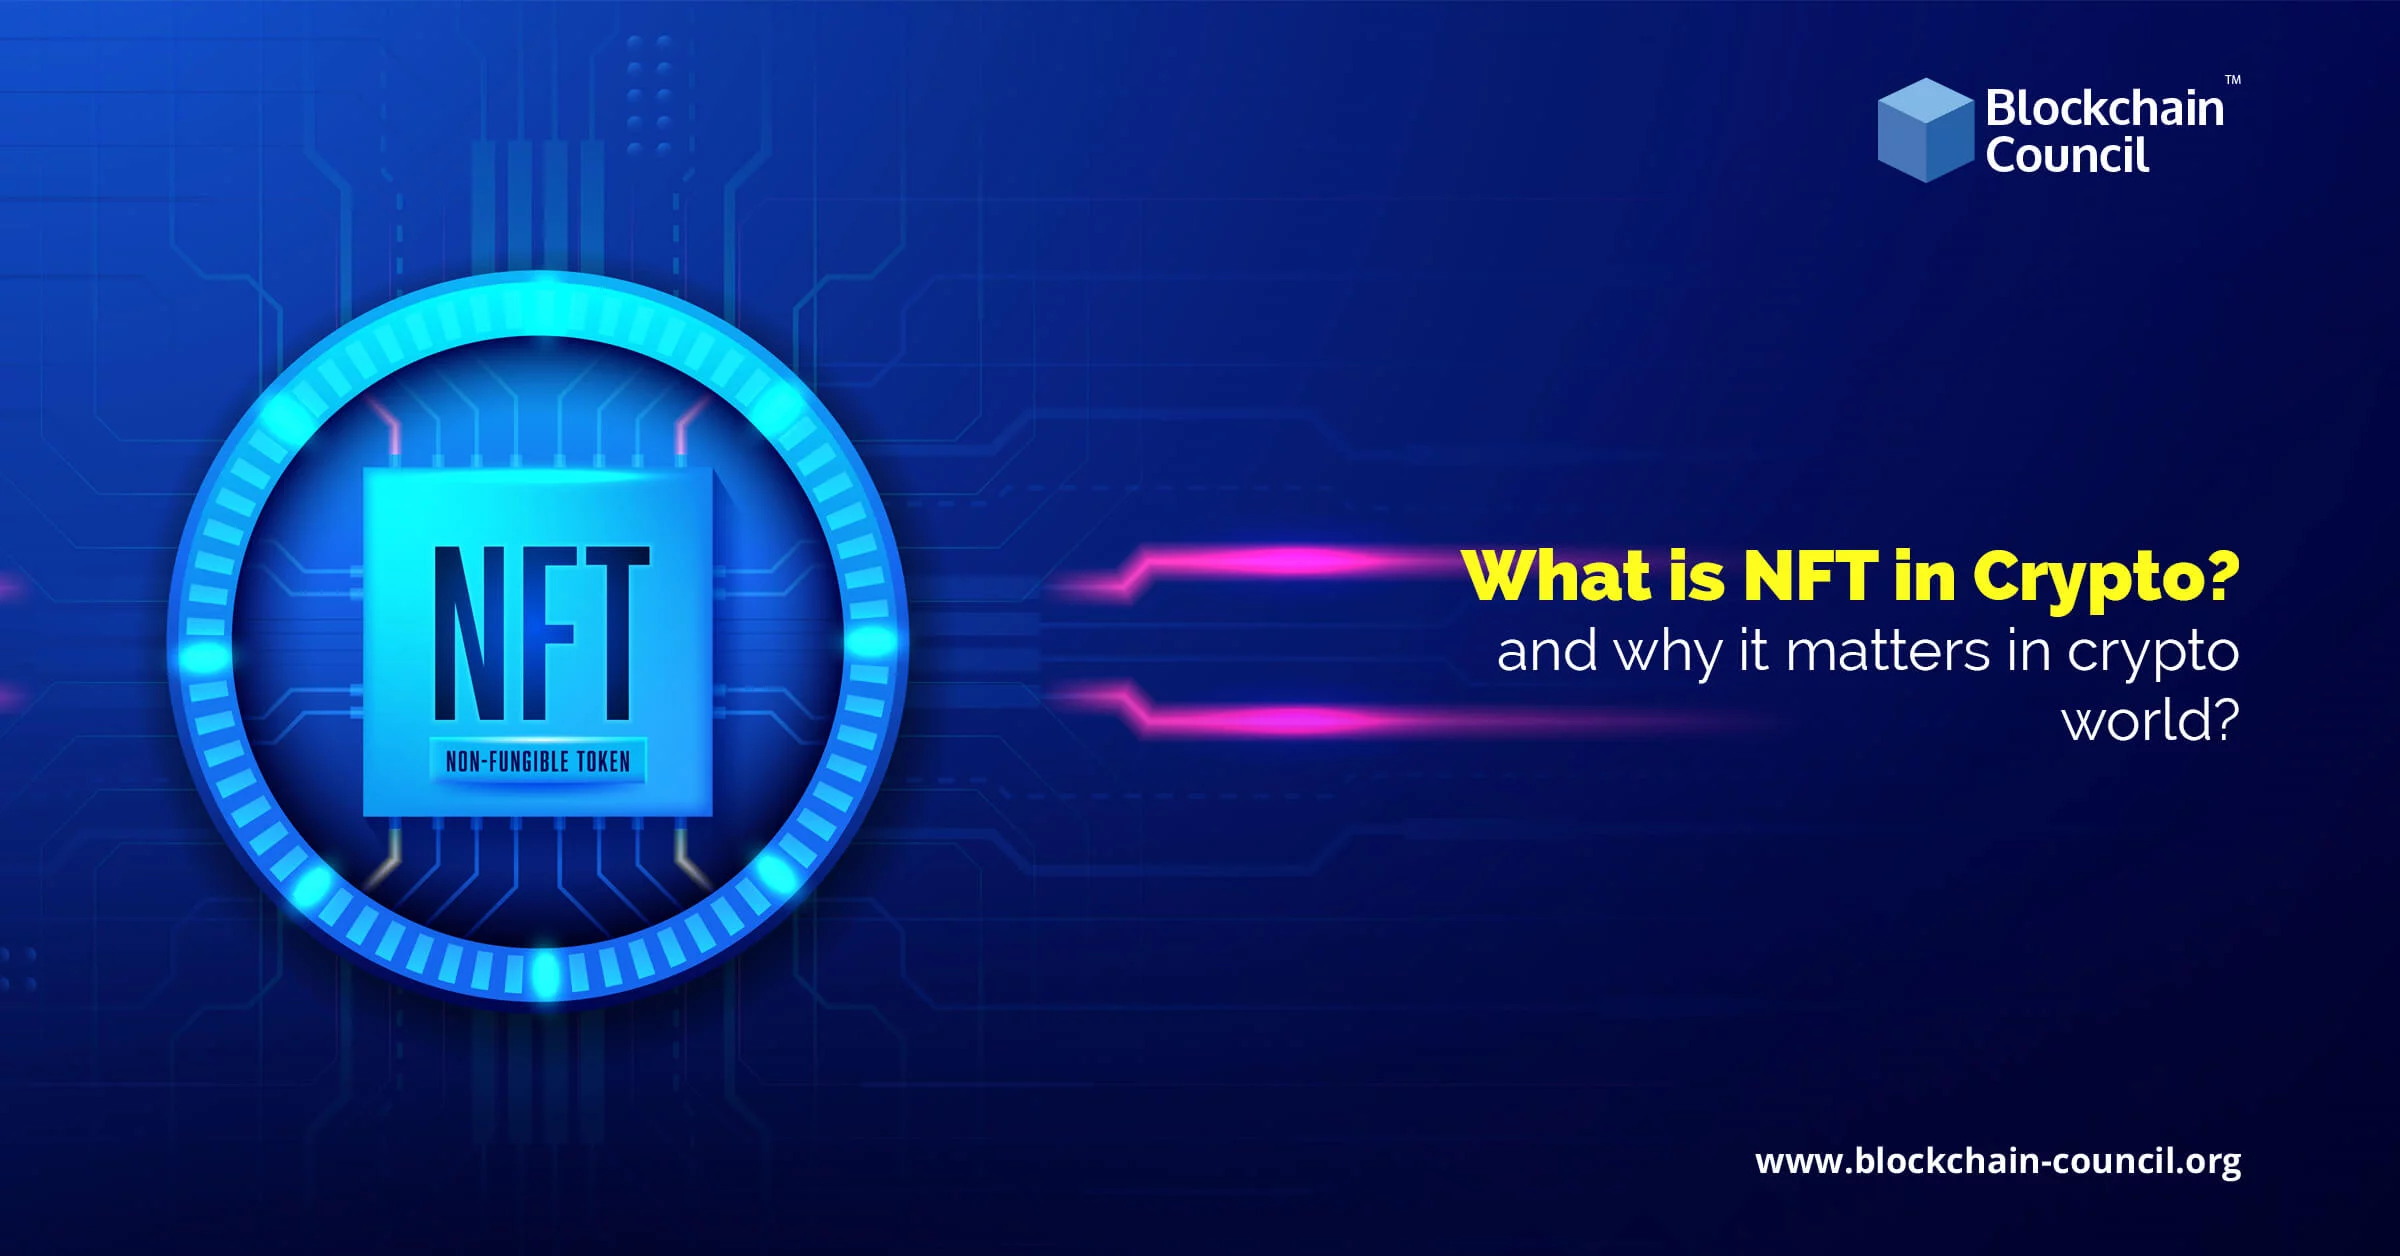 what is nft crypto